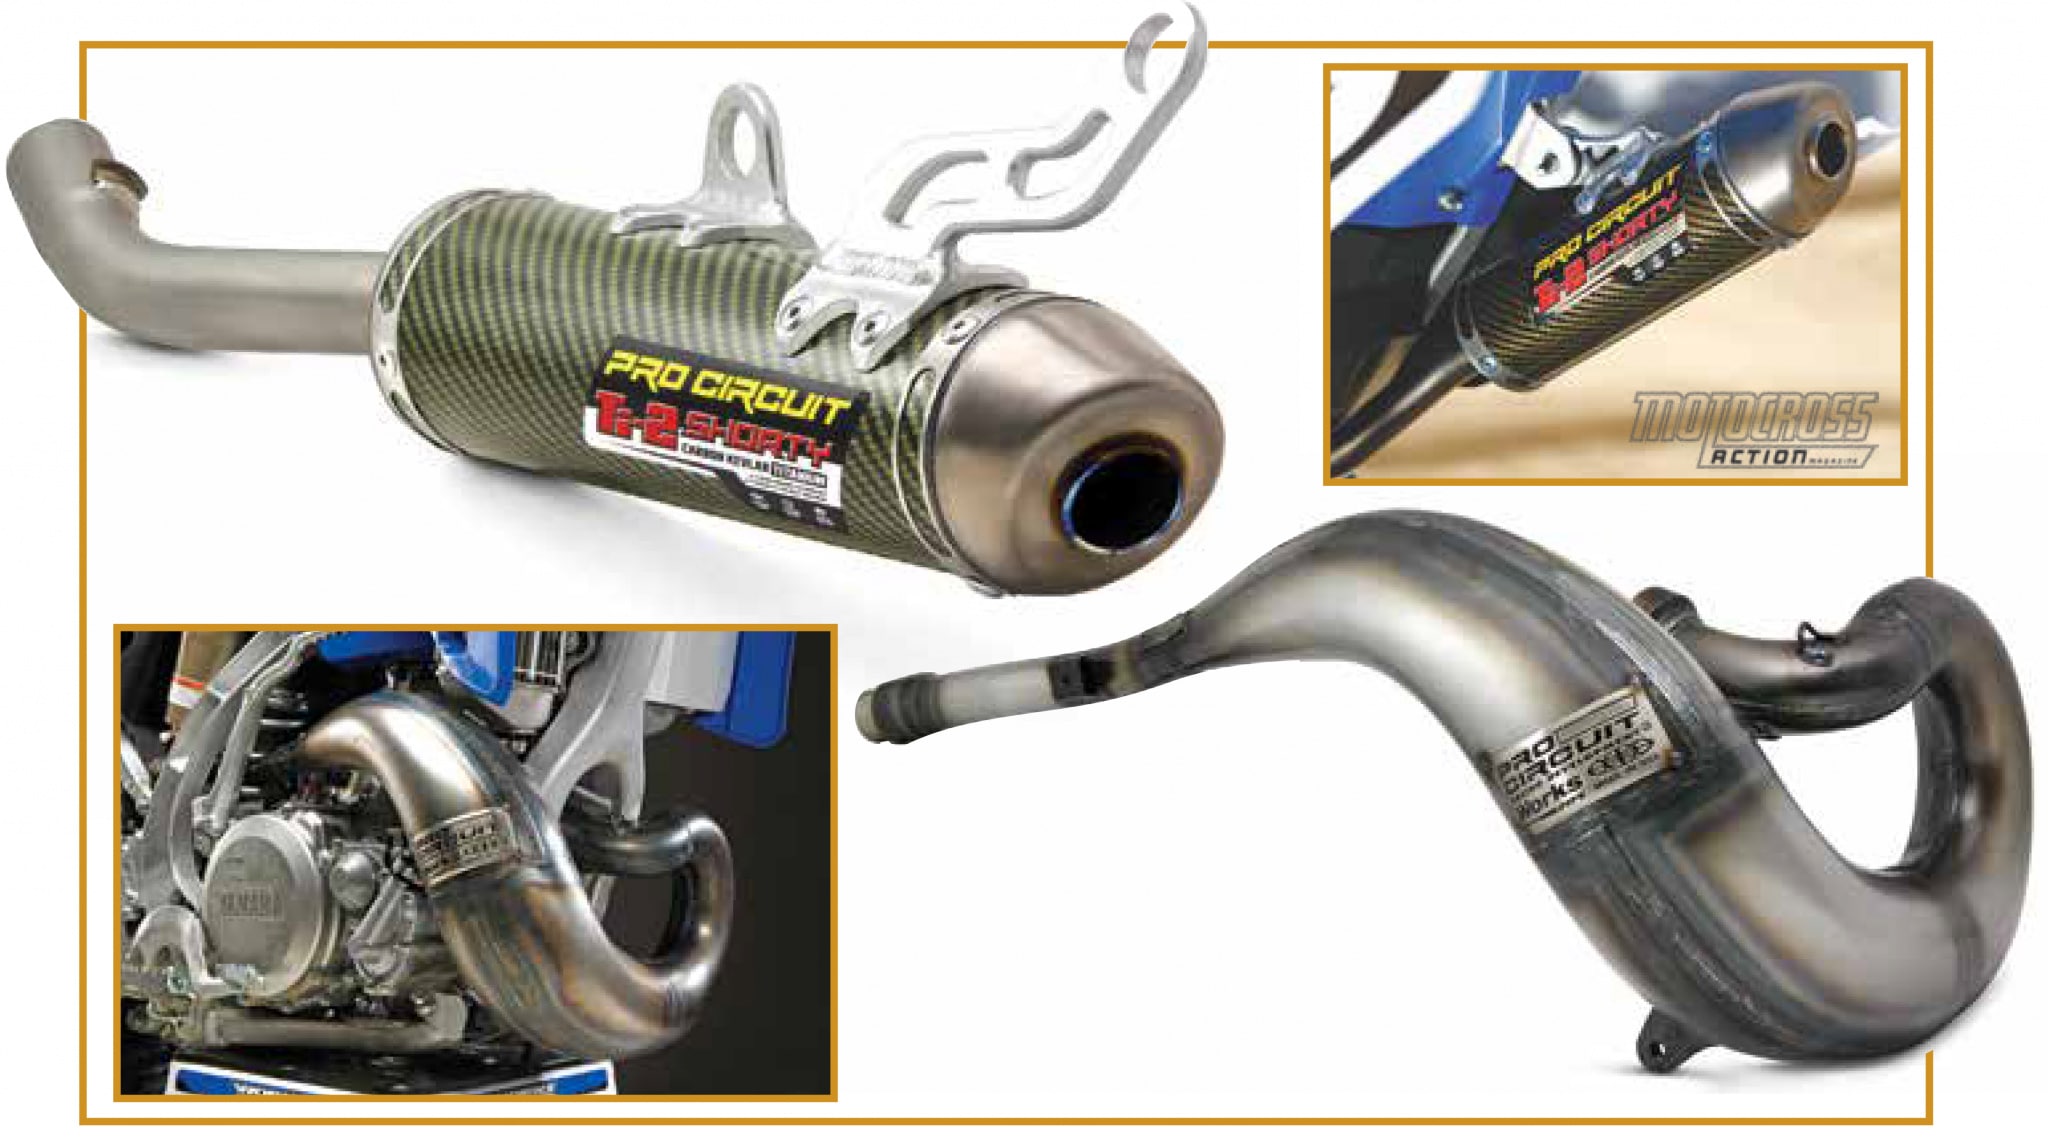 compatible with Yamaha YZ250 YZ250X 2003-on_PY05250P|SY03250-SE Pro Circuit Exhaust System Platinum Pipe & 304 Silencer